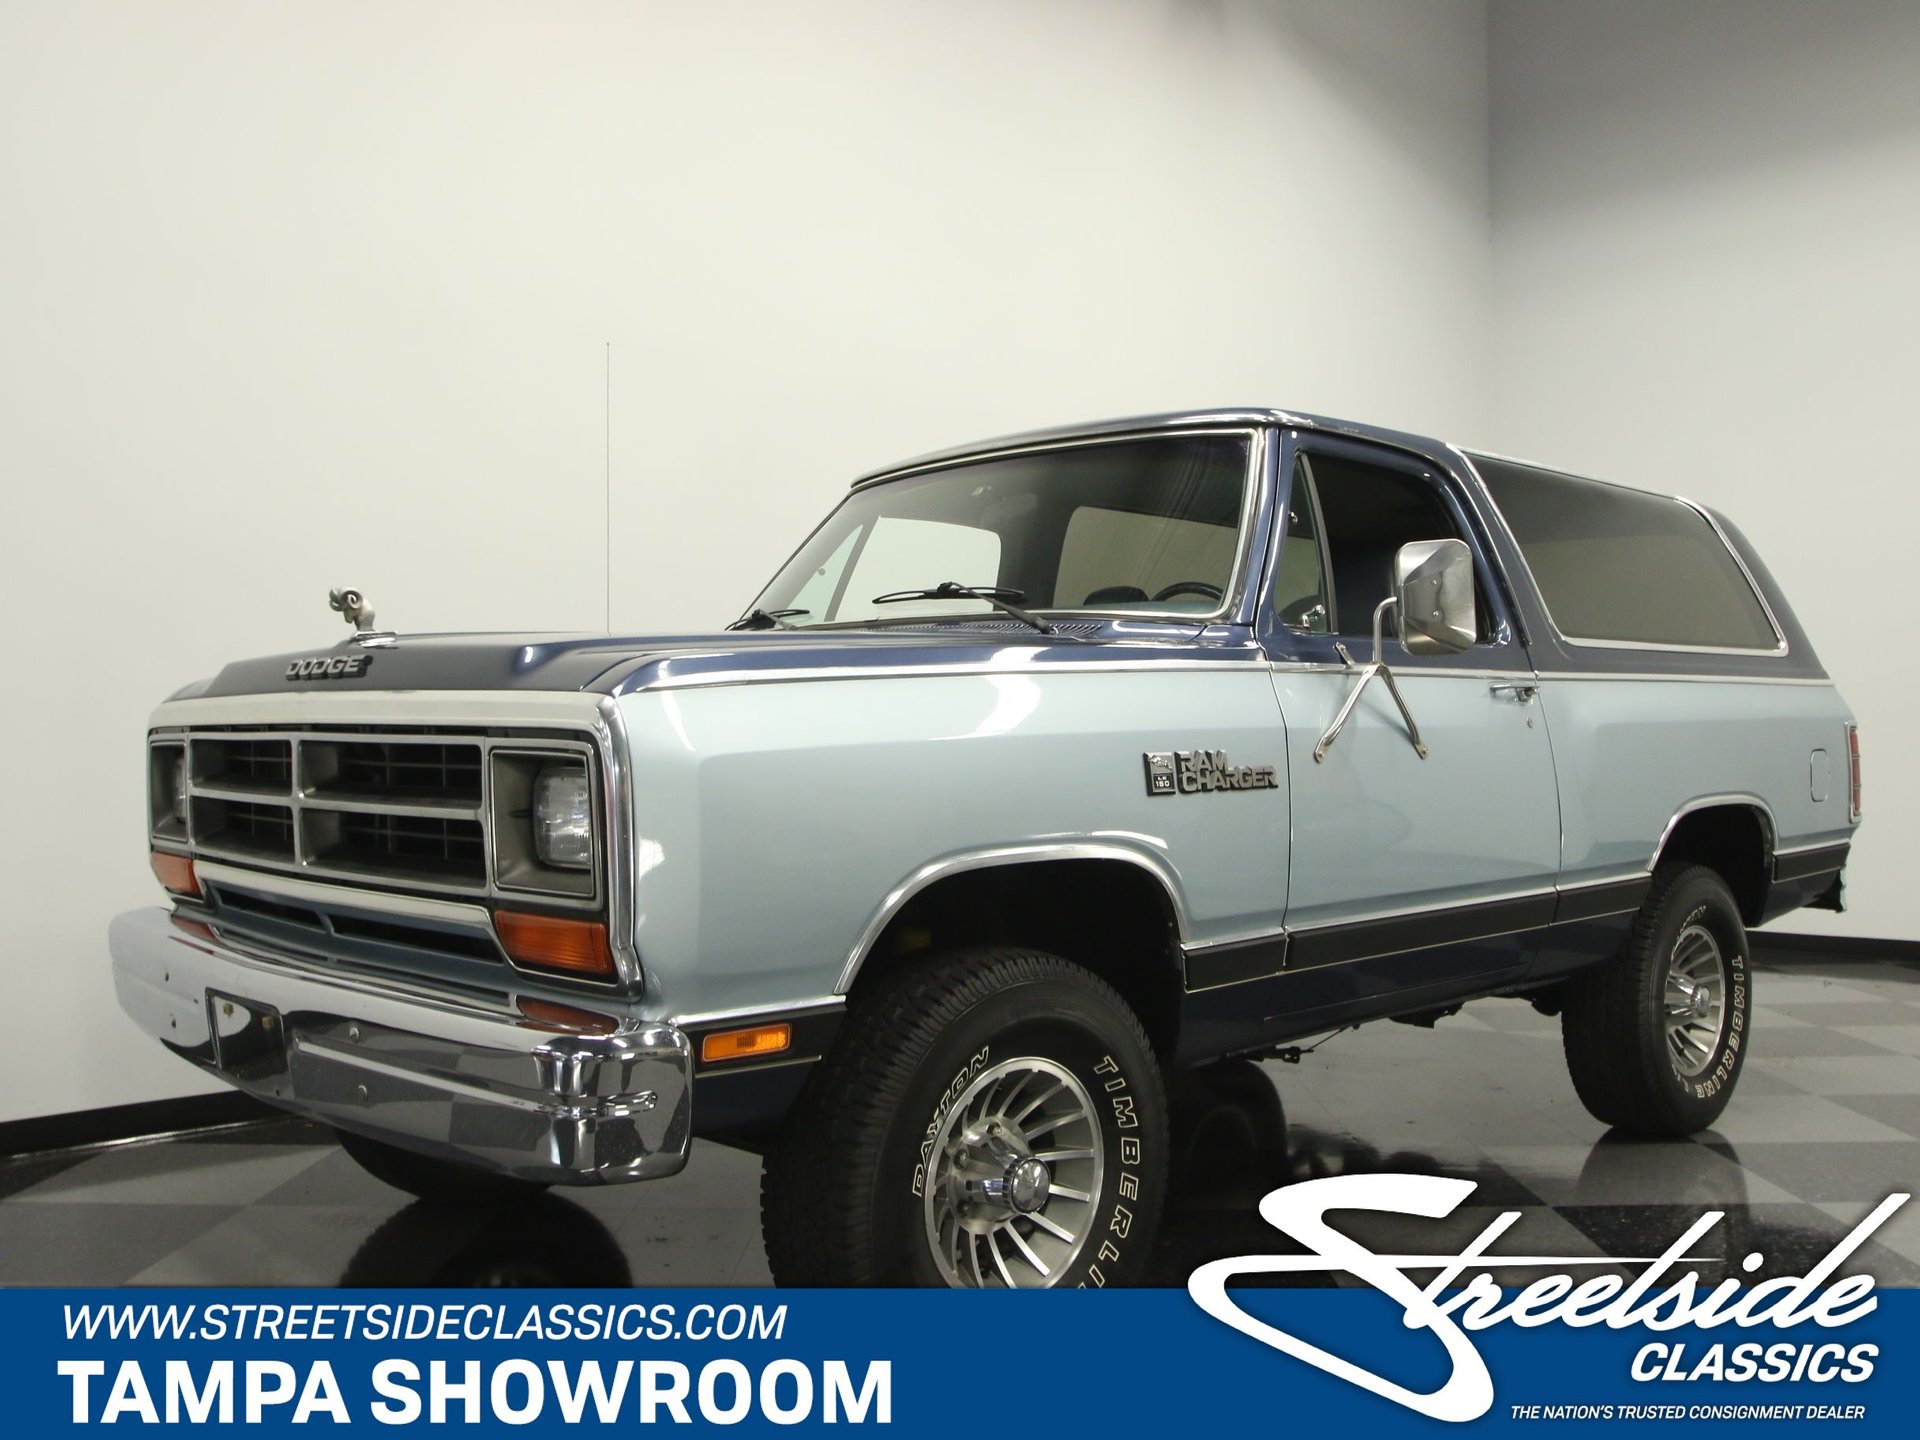 1987 Dodge Ramcharger | Classic Cars for Sale - Streetside Classics